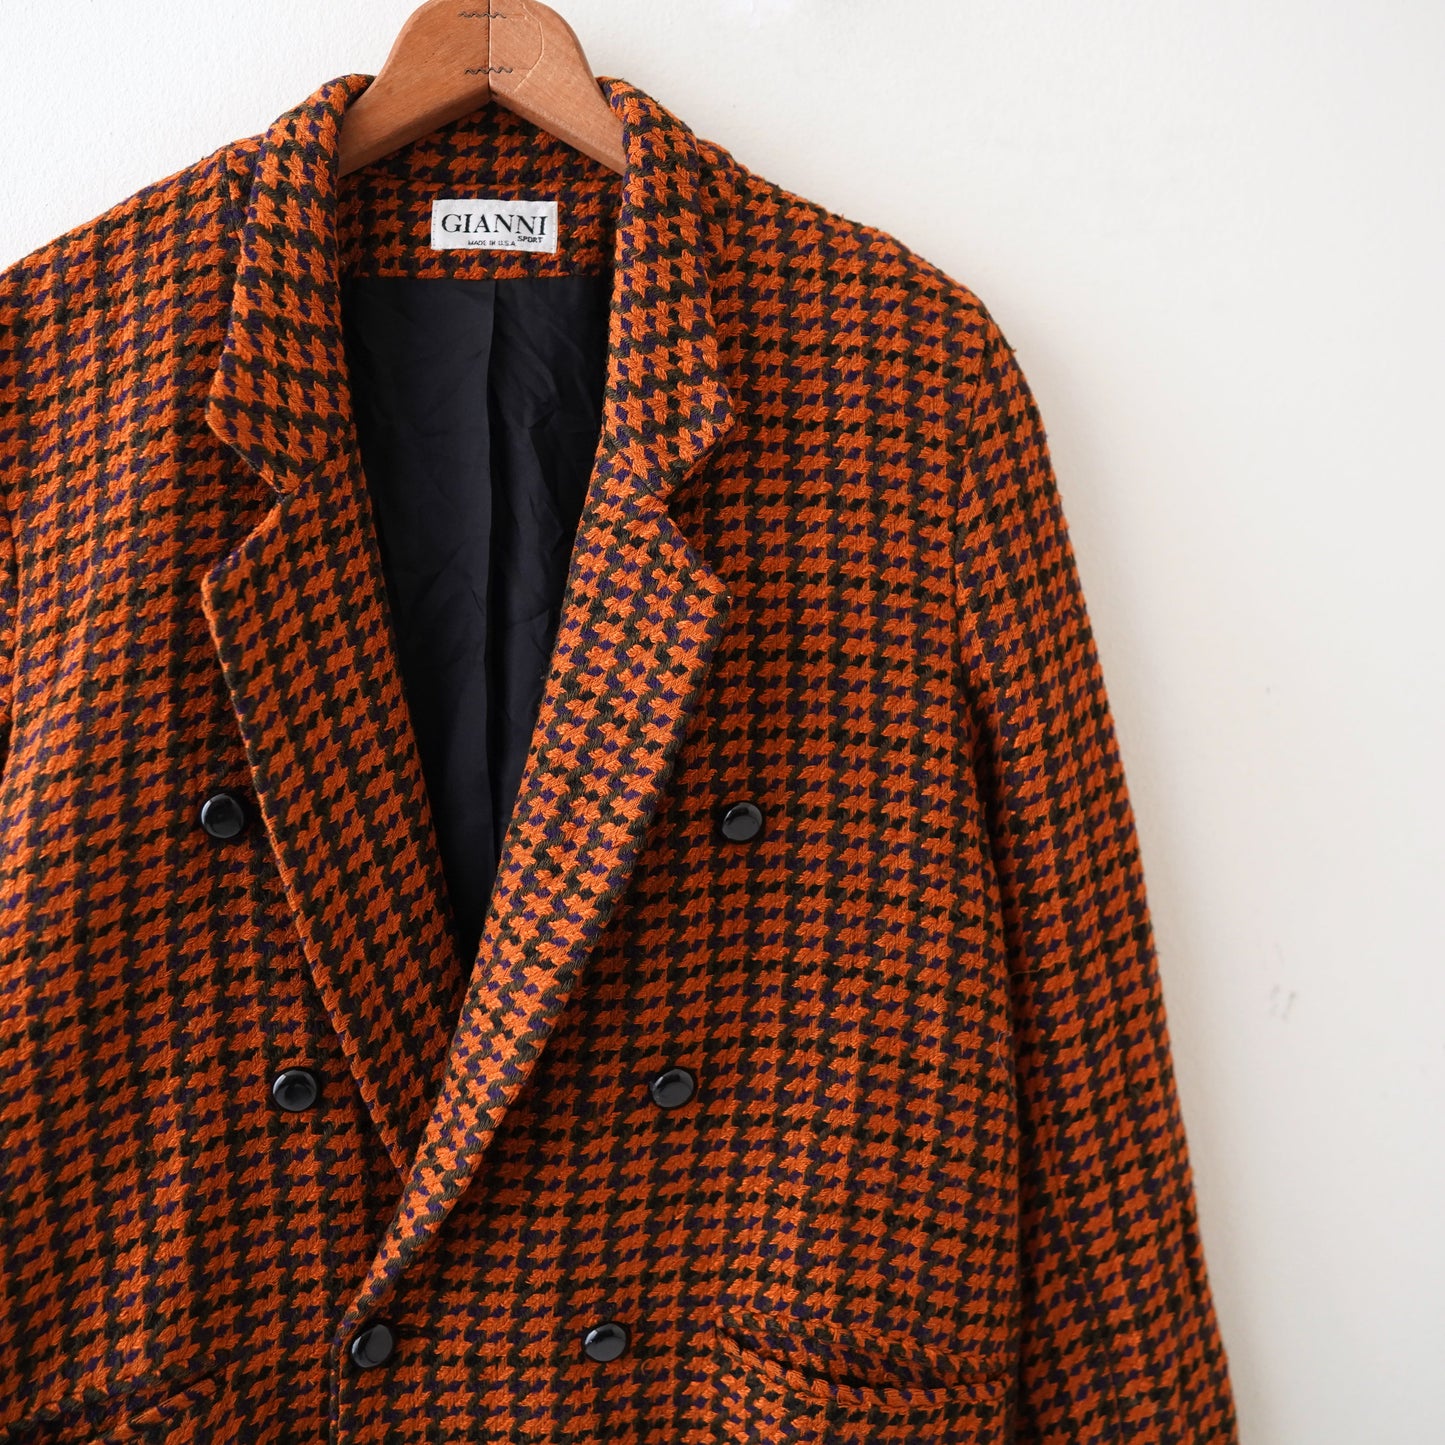 Houndstooth tailored jacket